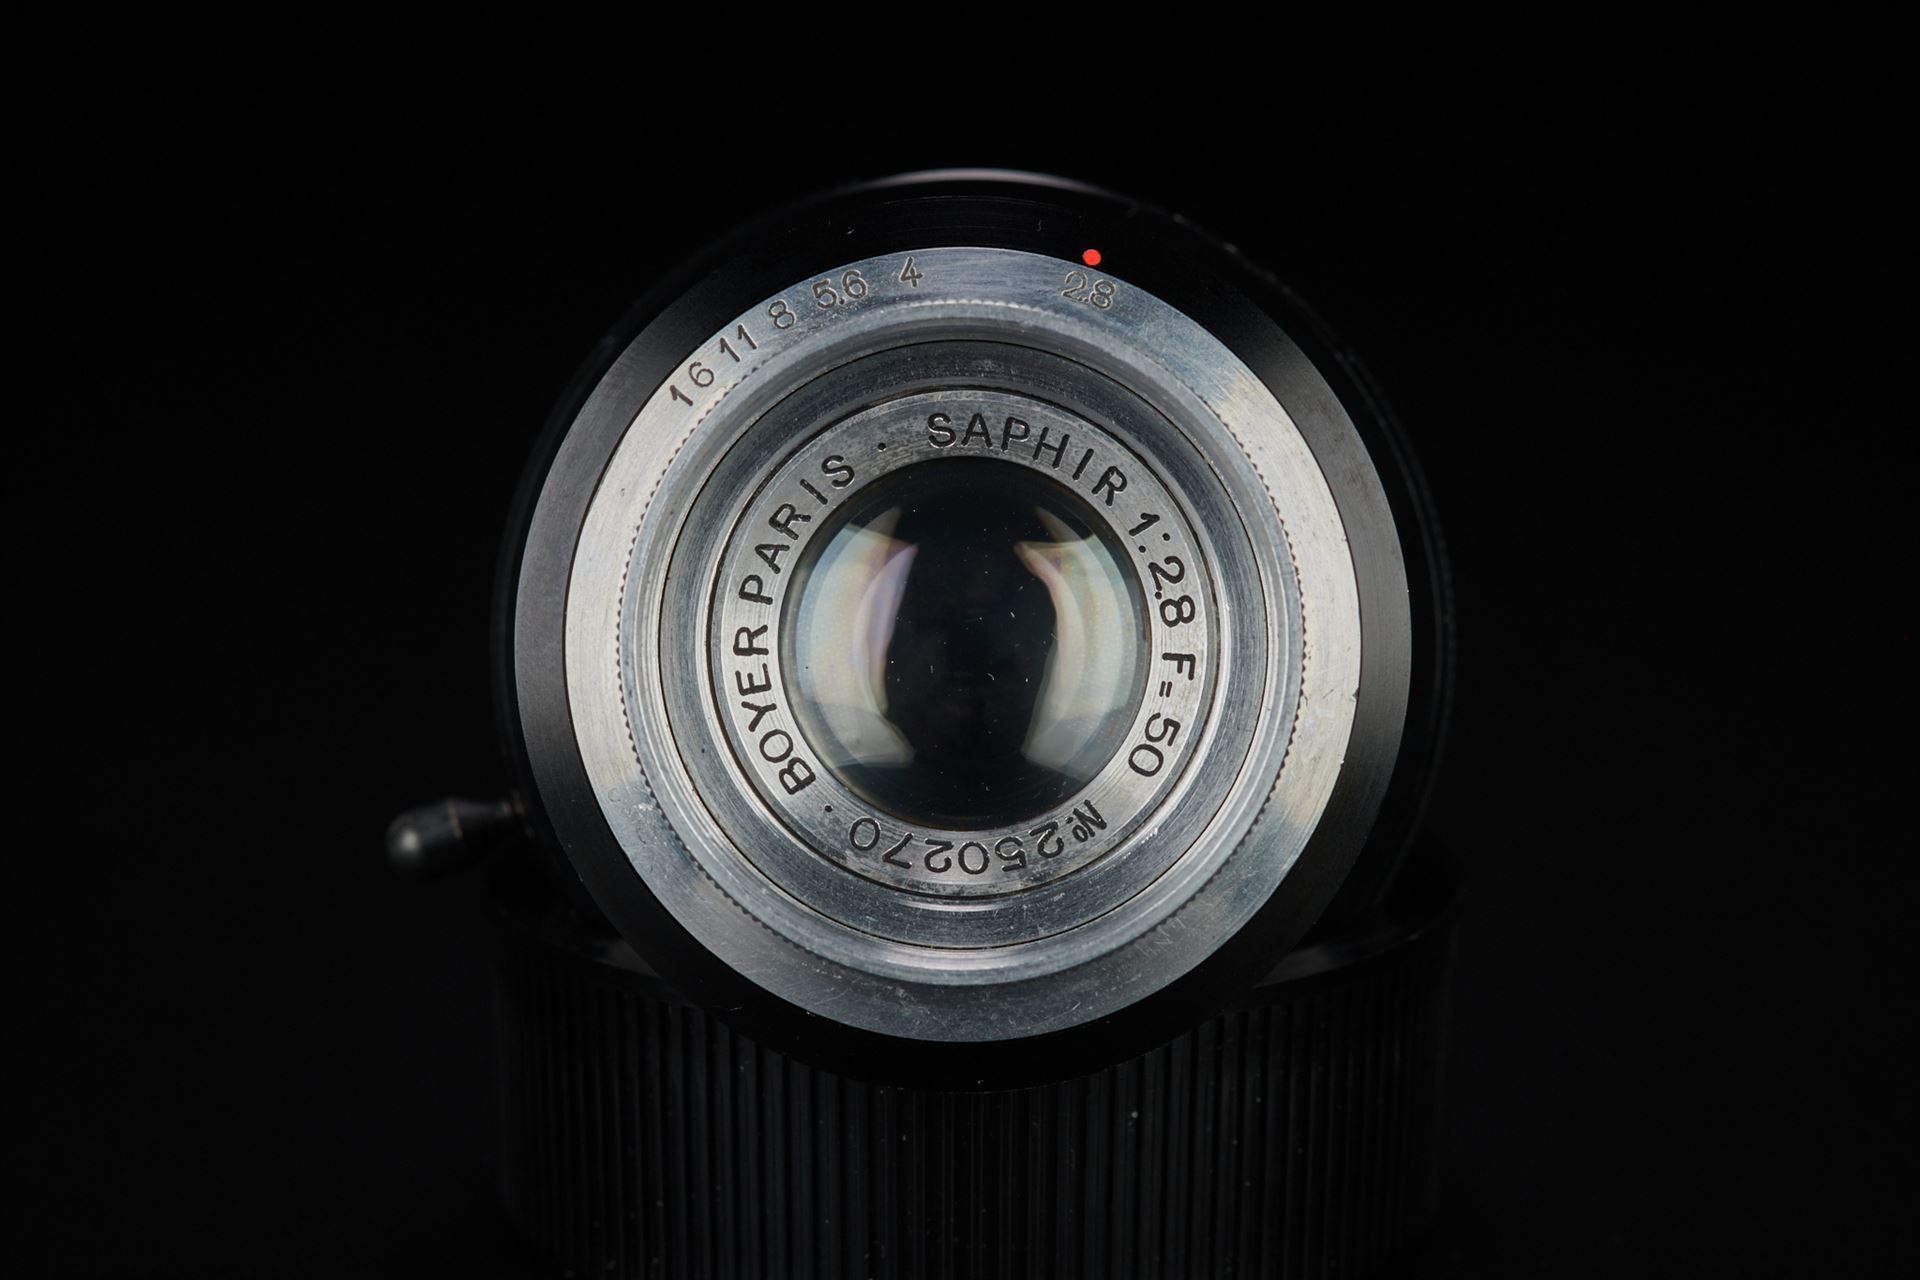 Picture of Boyer Paris Saphir 50mm f/2.8 for Leica M